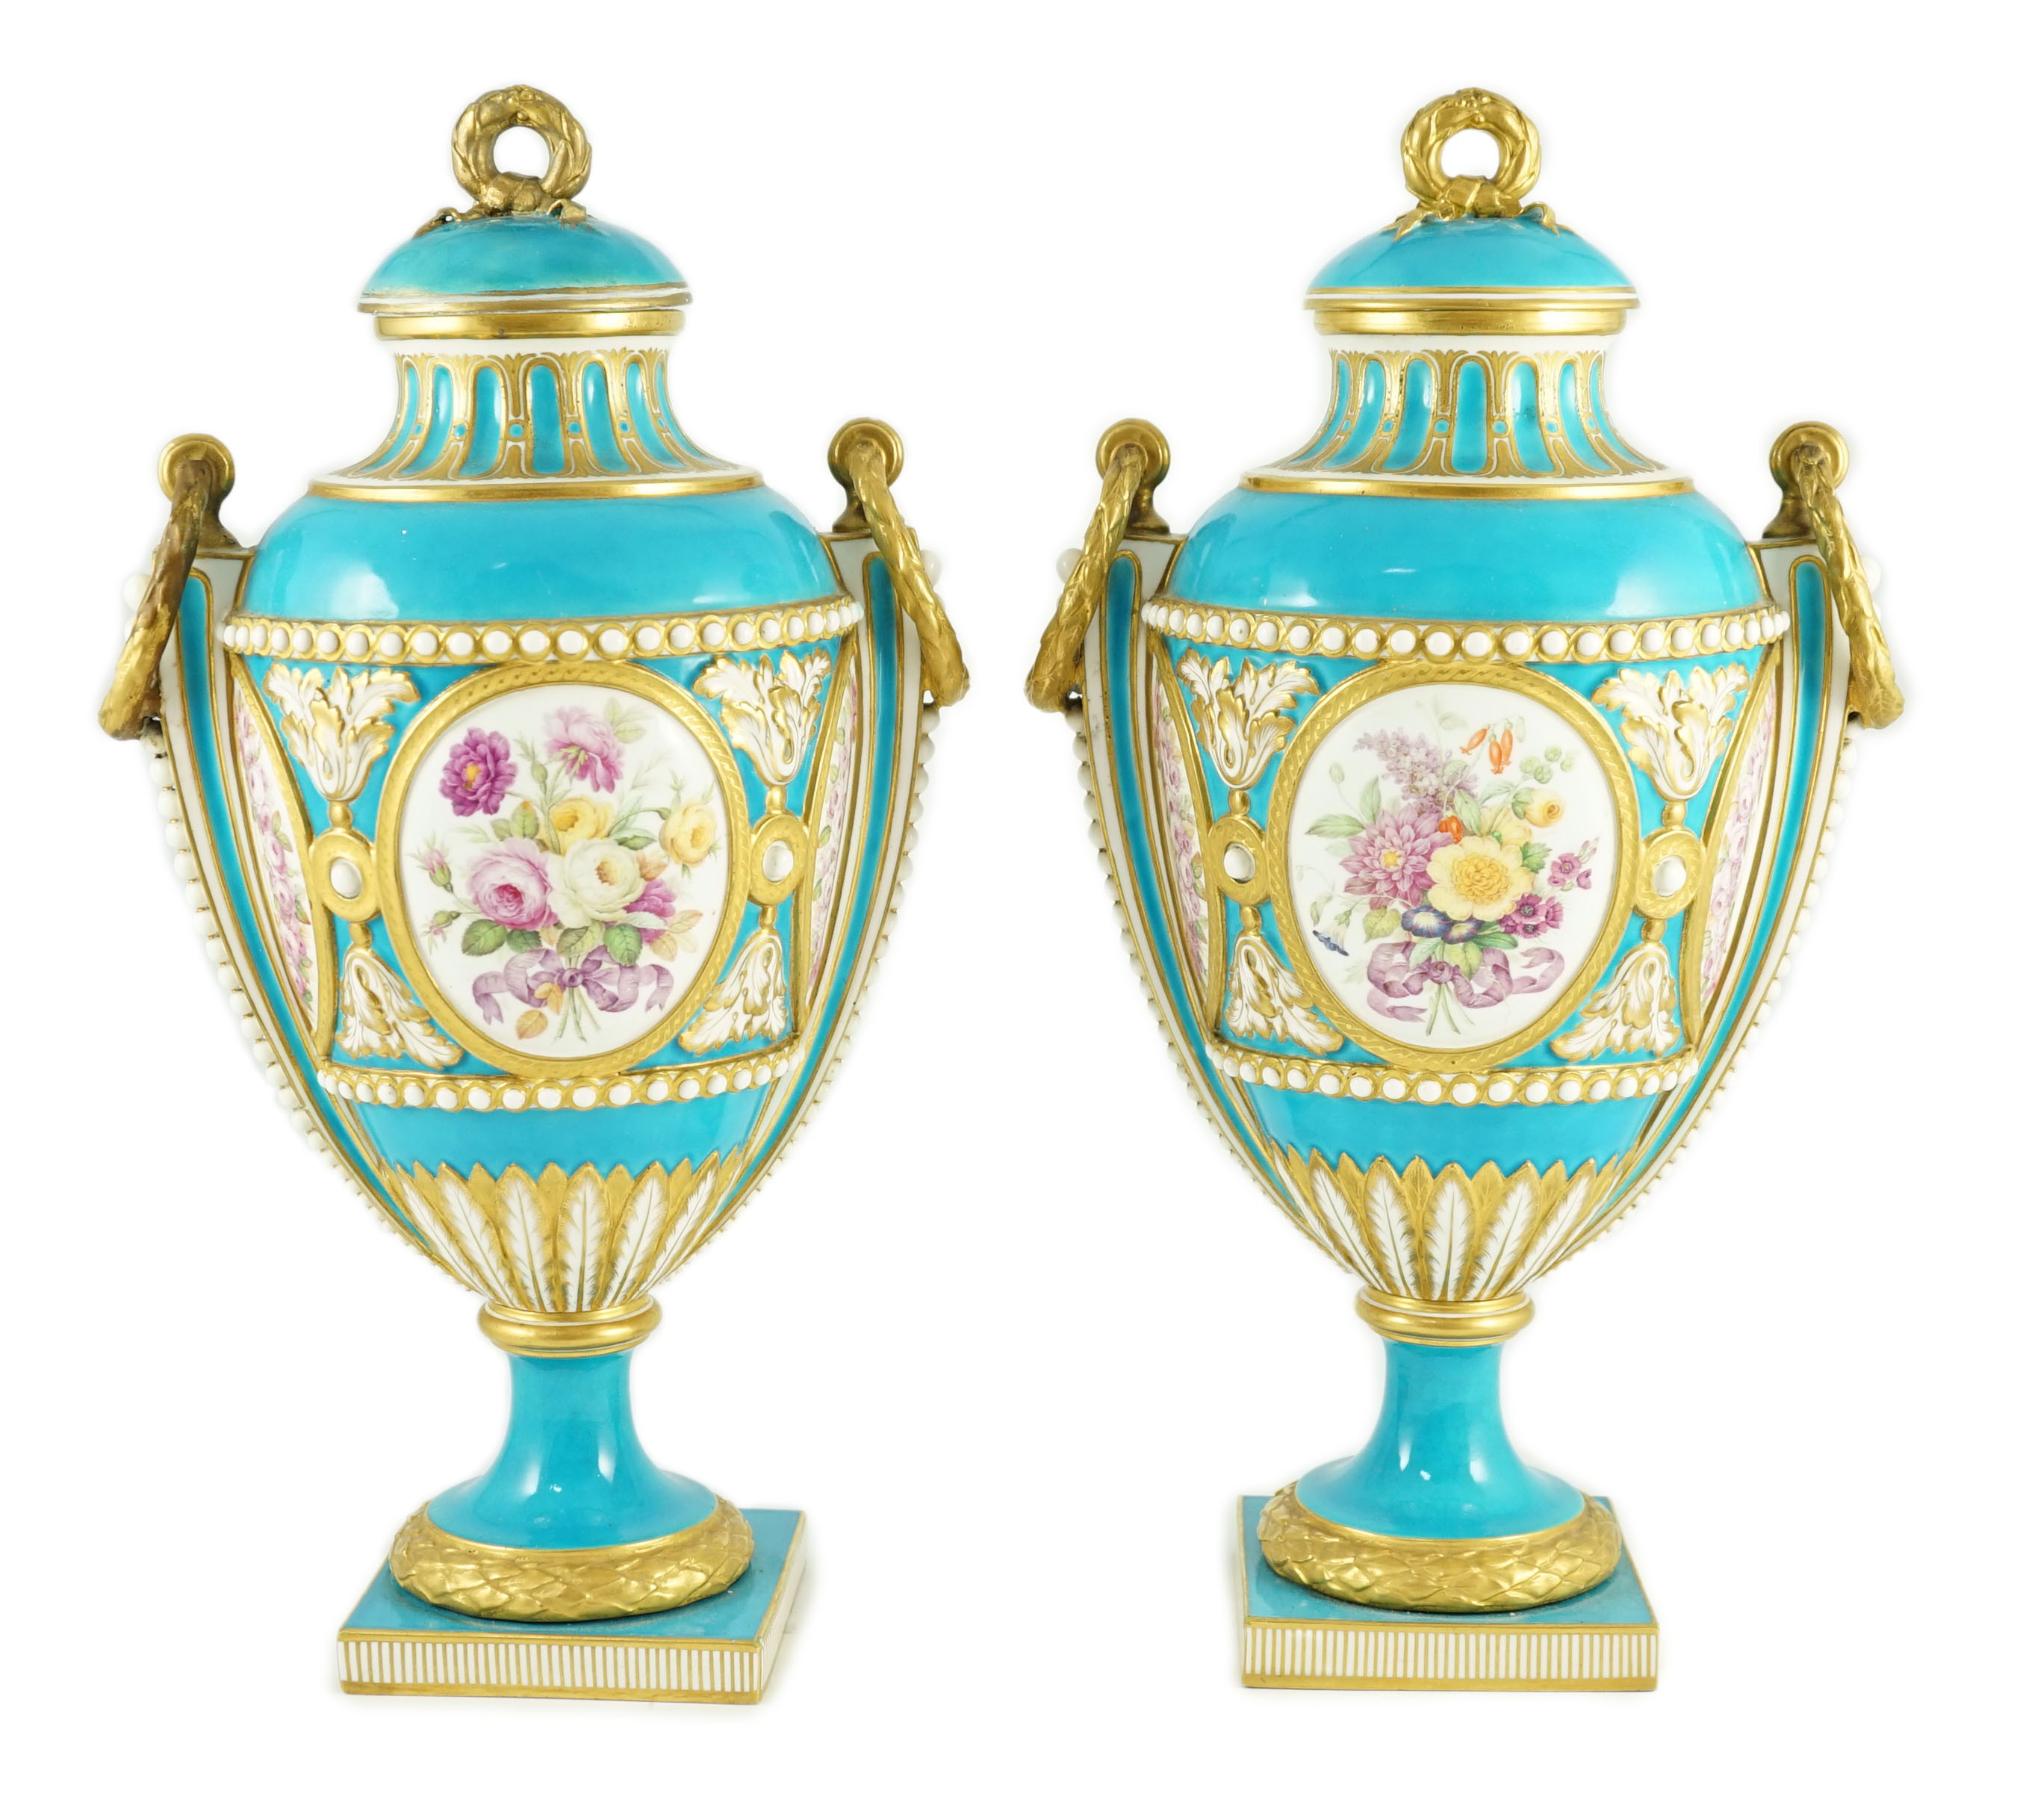 A pair of Minton Sevres style vases and covers, mid 19th century, 41cm high, one cover restored